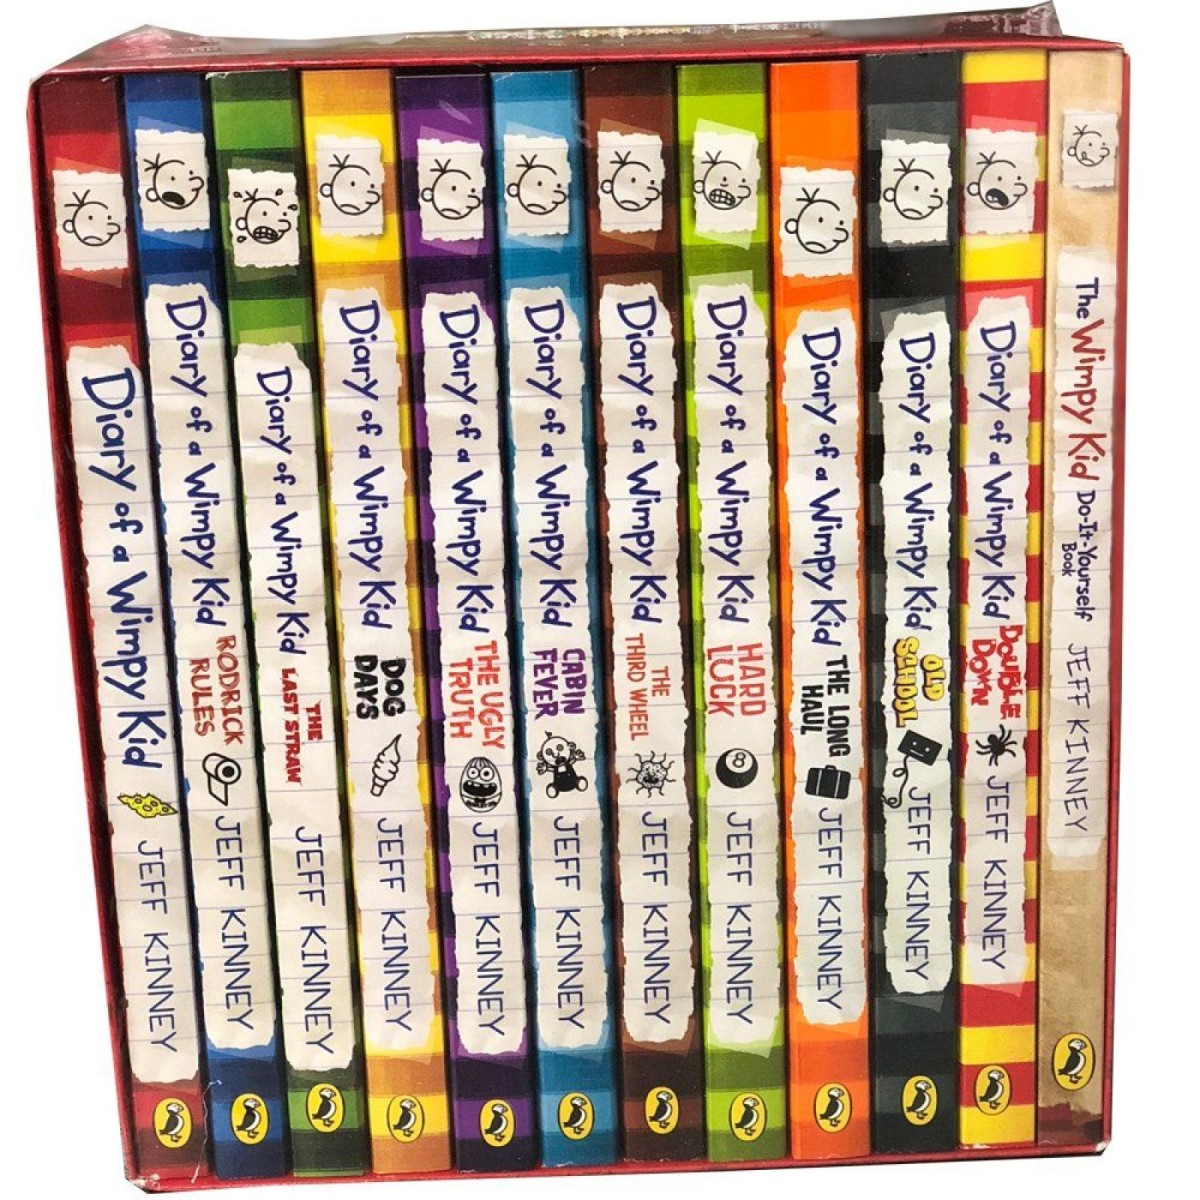 Diary of a Wimpy Kid Collection 11 Books Set Pack (1-11)